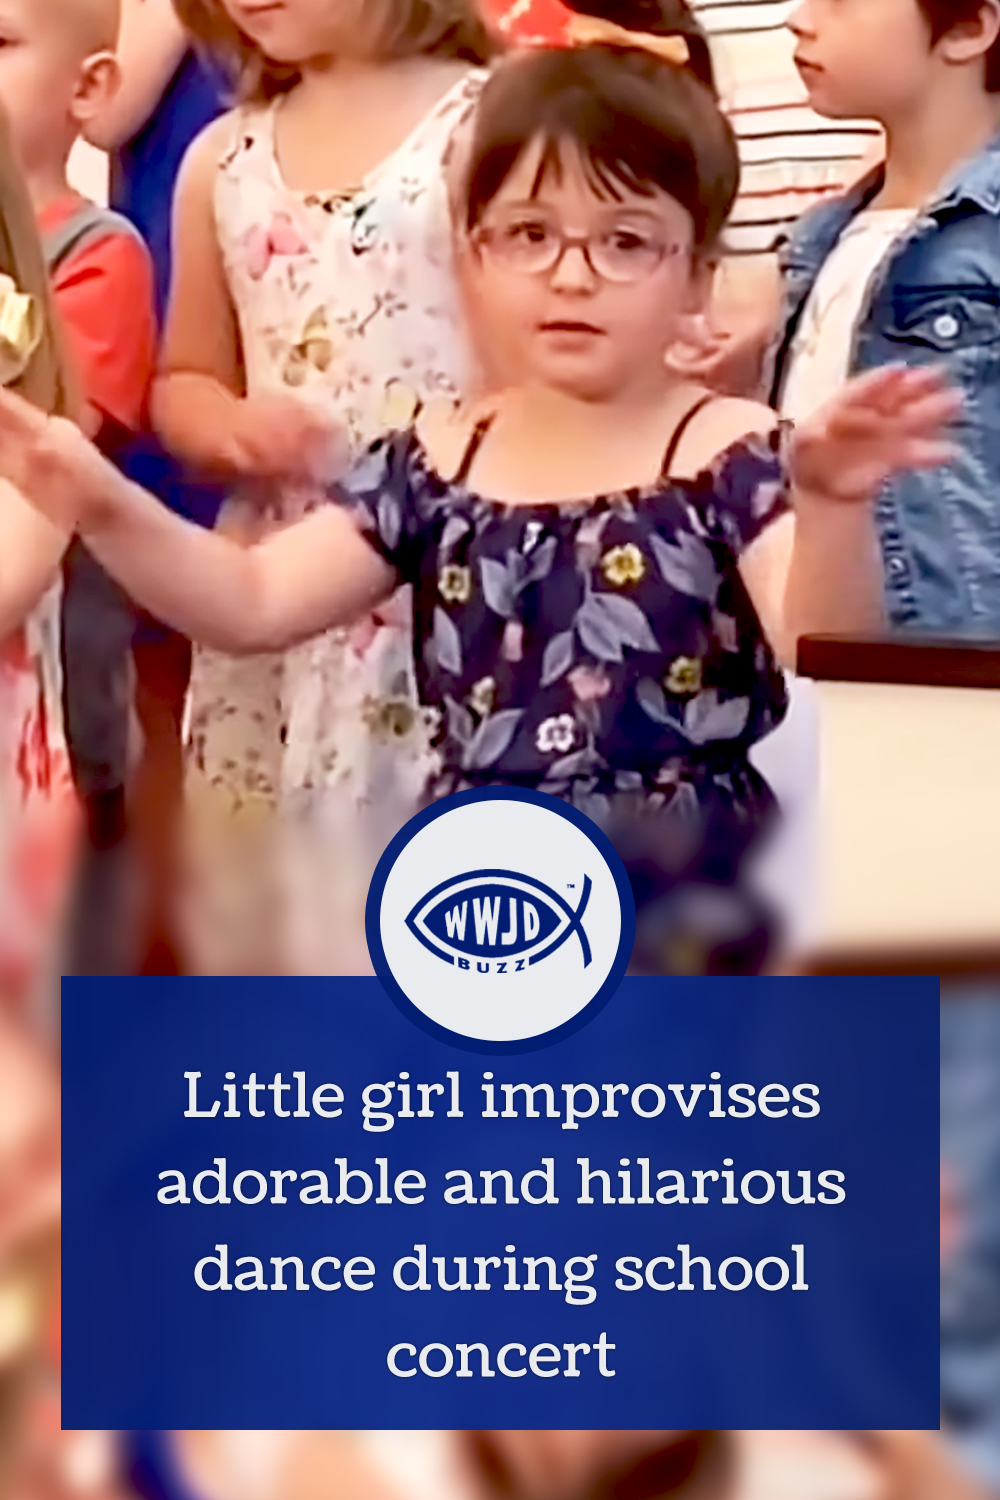 Little girl improvises adorable and hilarious dance during school concert